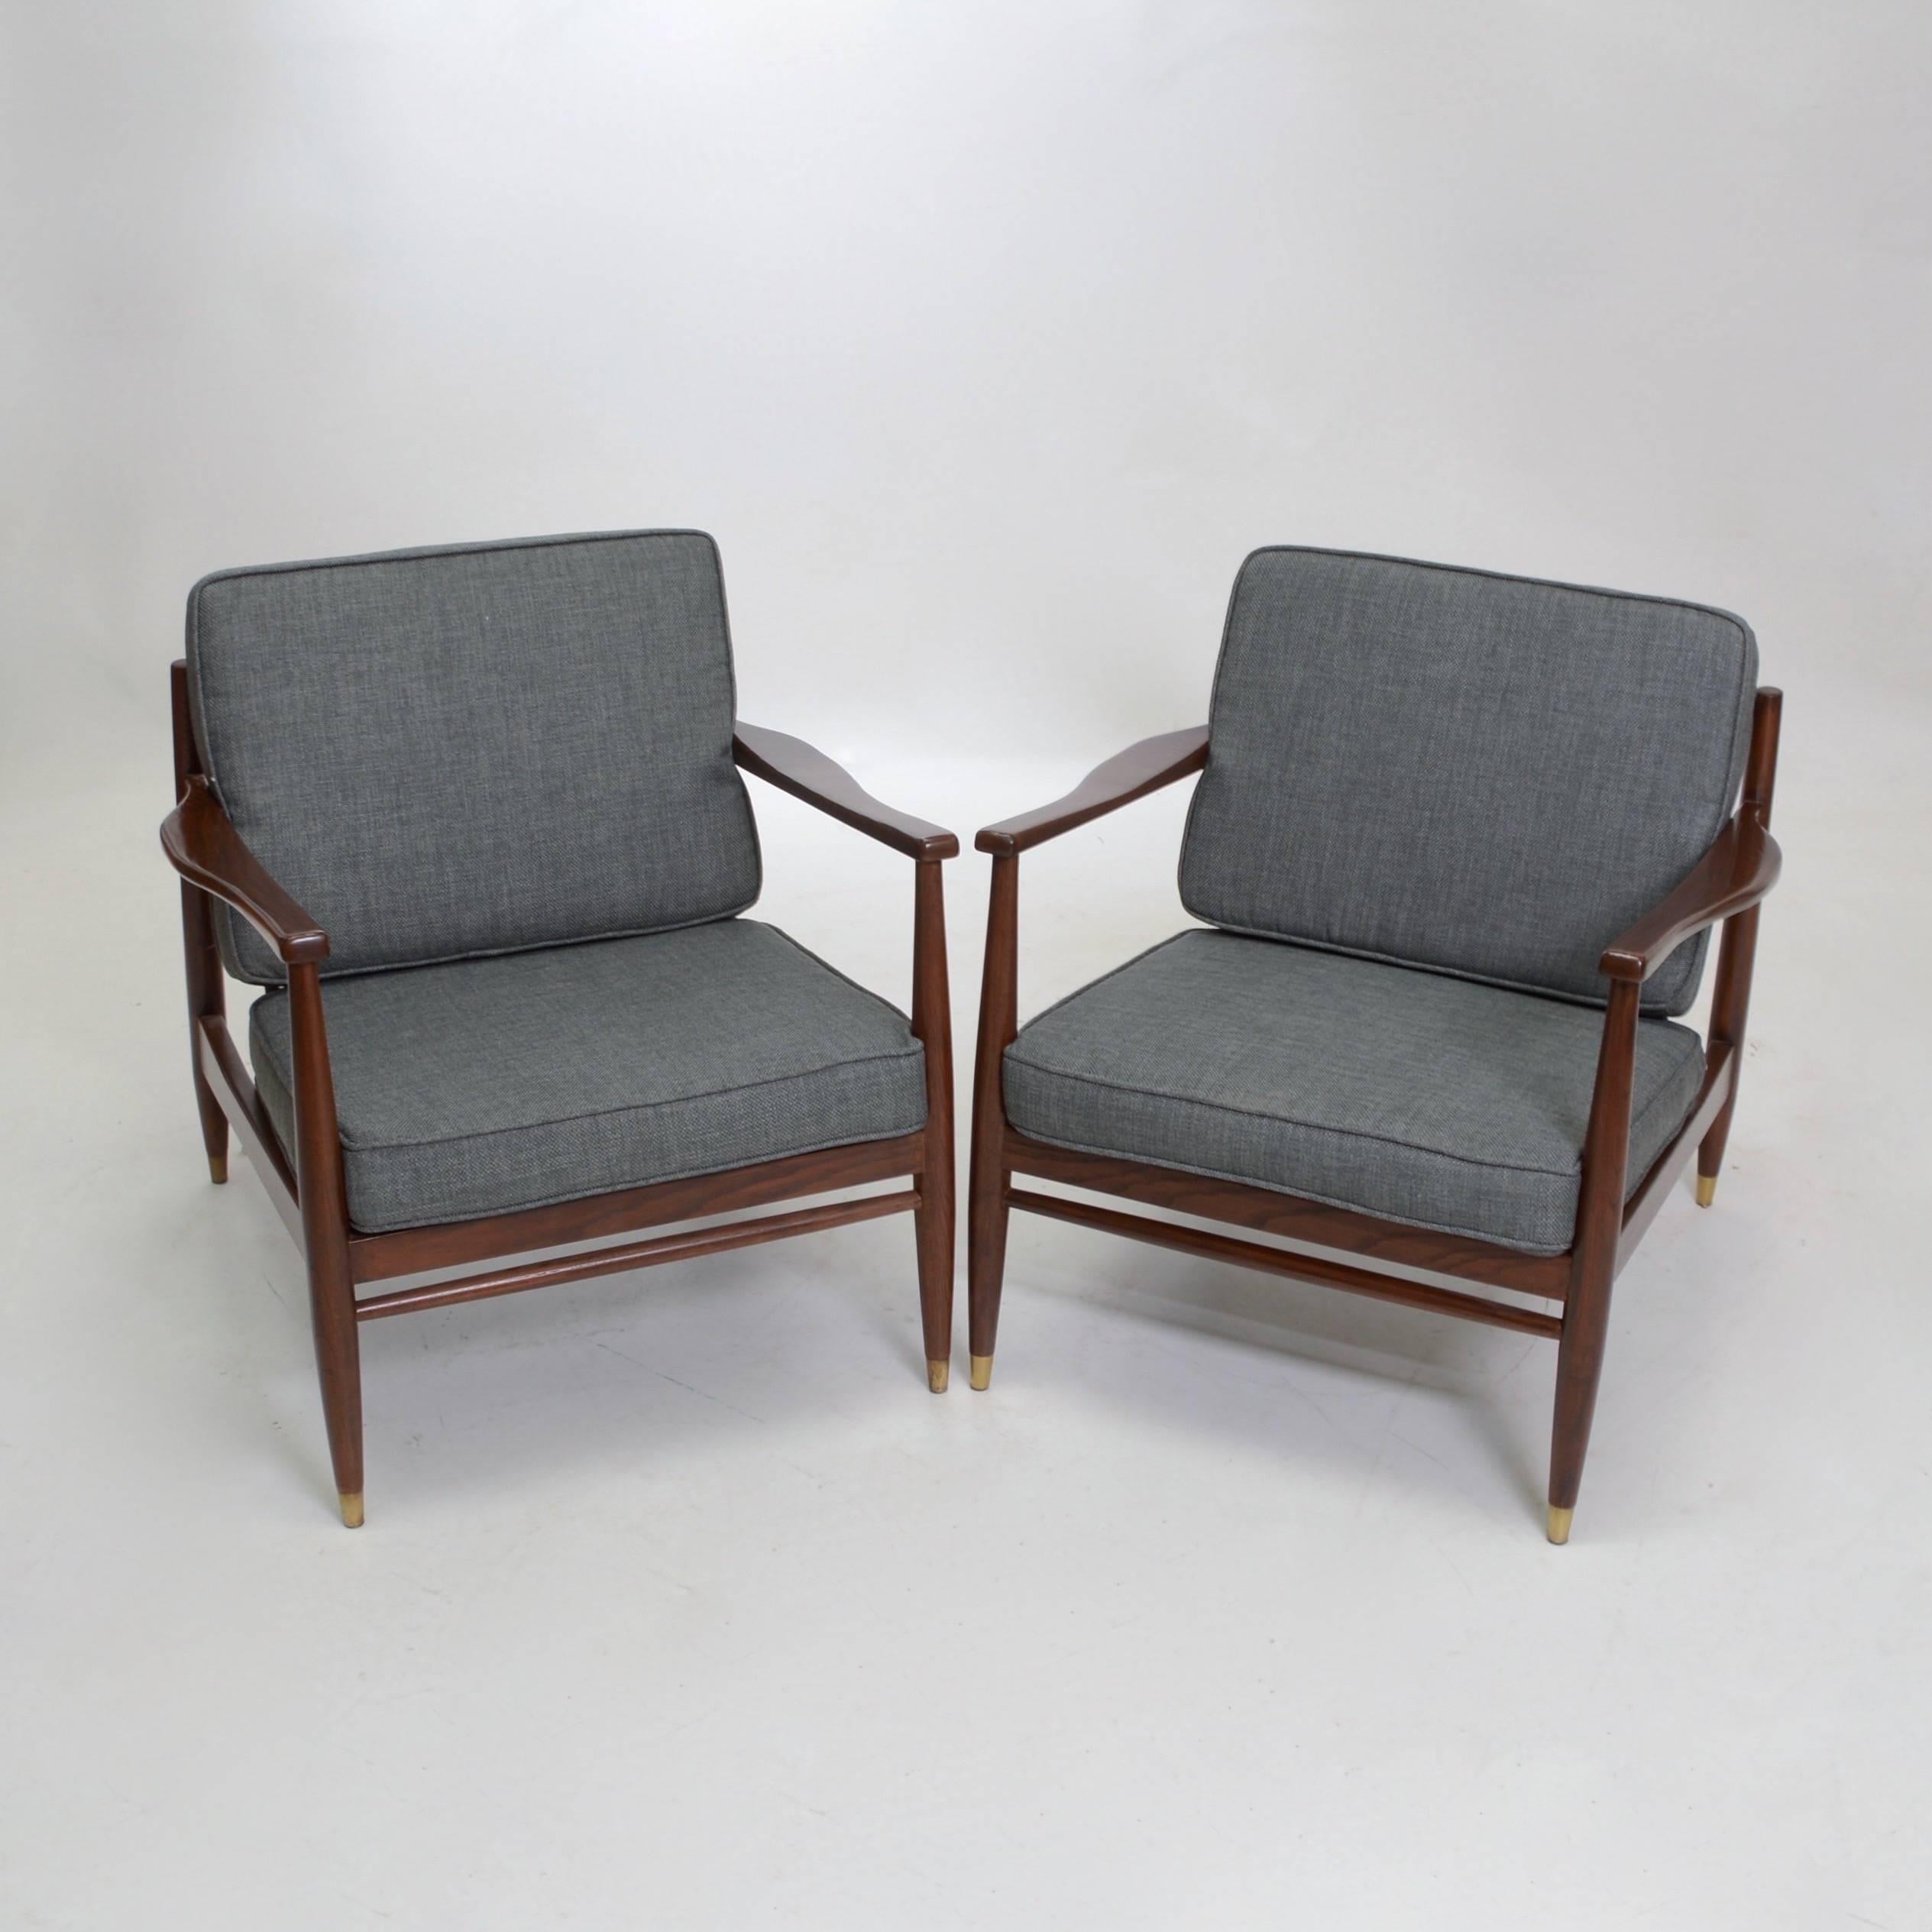 20th Century Pair of American Modern Armchairs in the Style of Grete Jalk